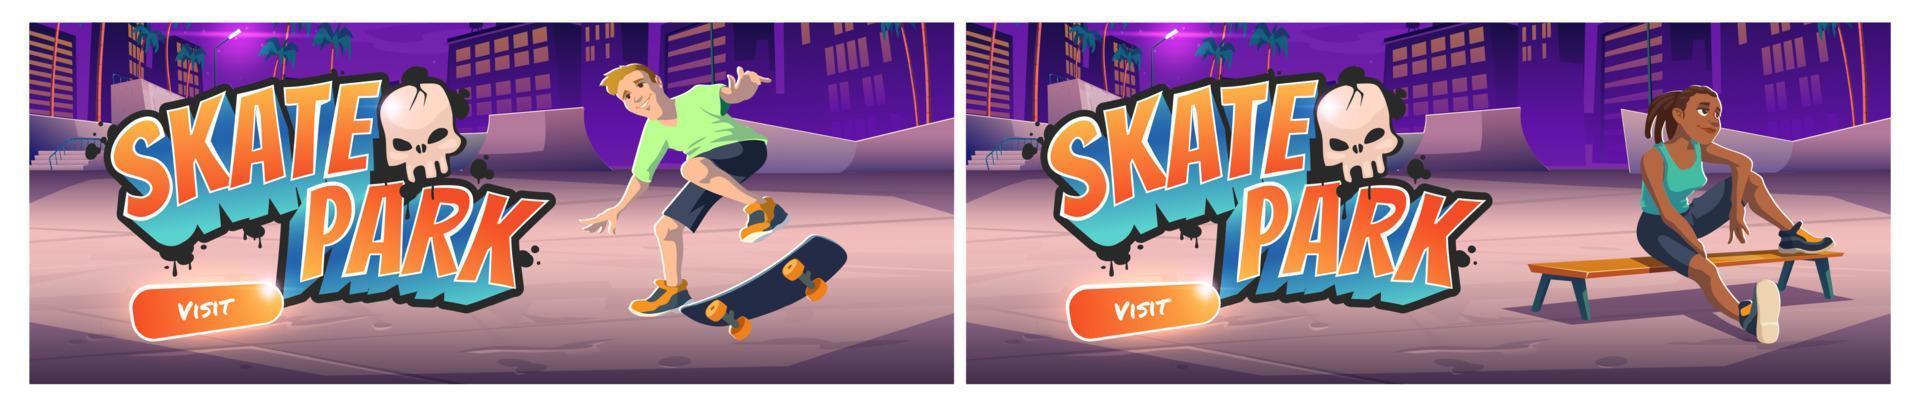 Skate park cartoon landing page with teenager vector